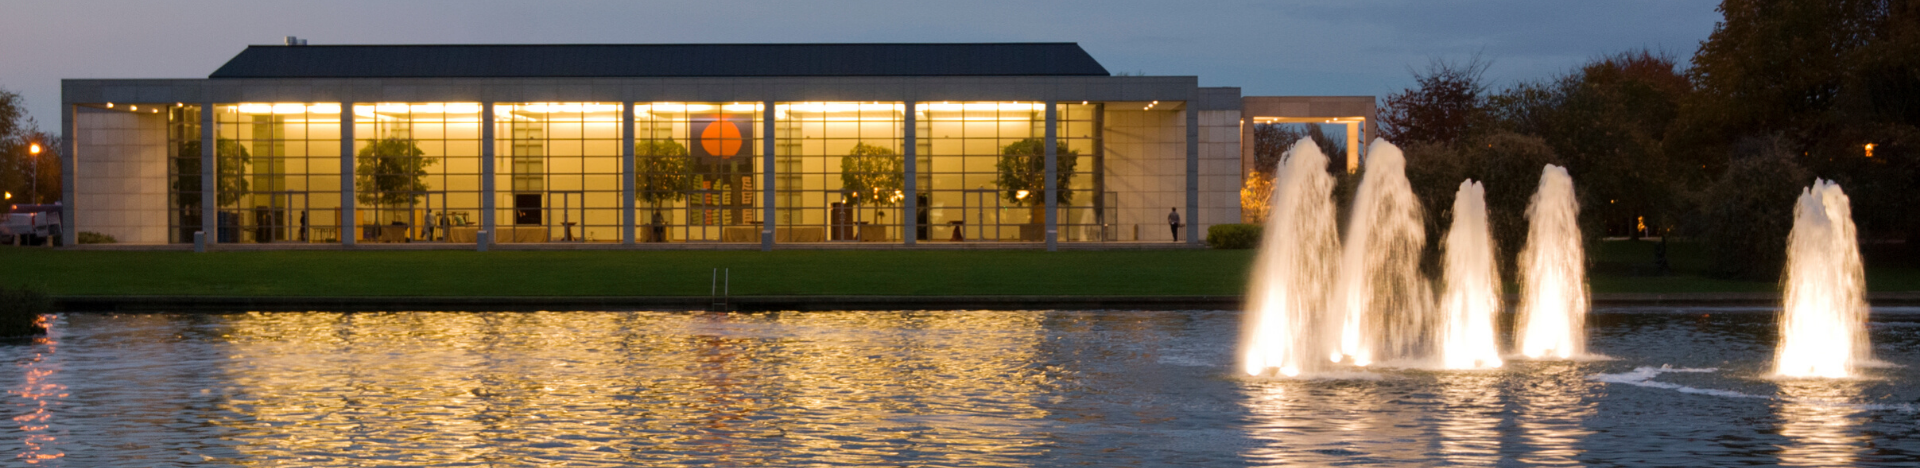 UCD's O'Reilly Hall from across the lake